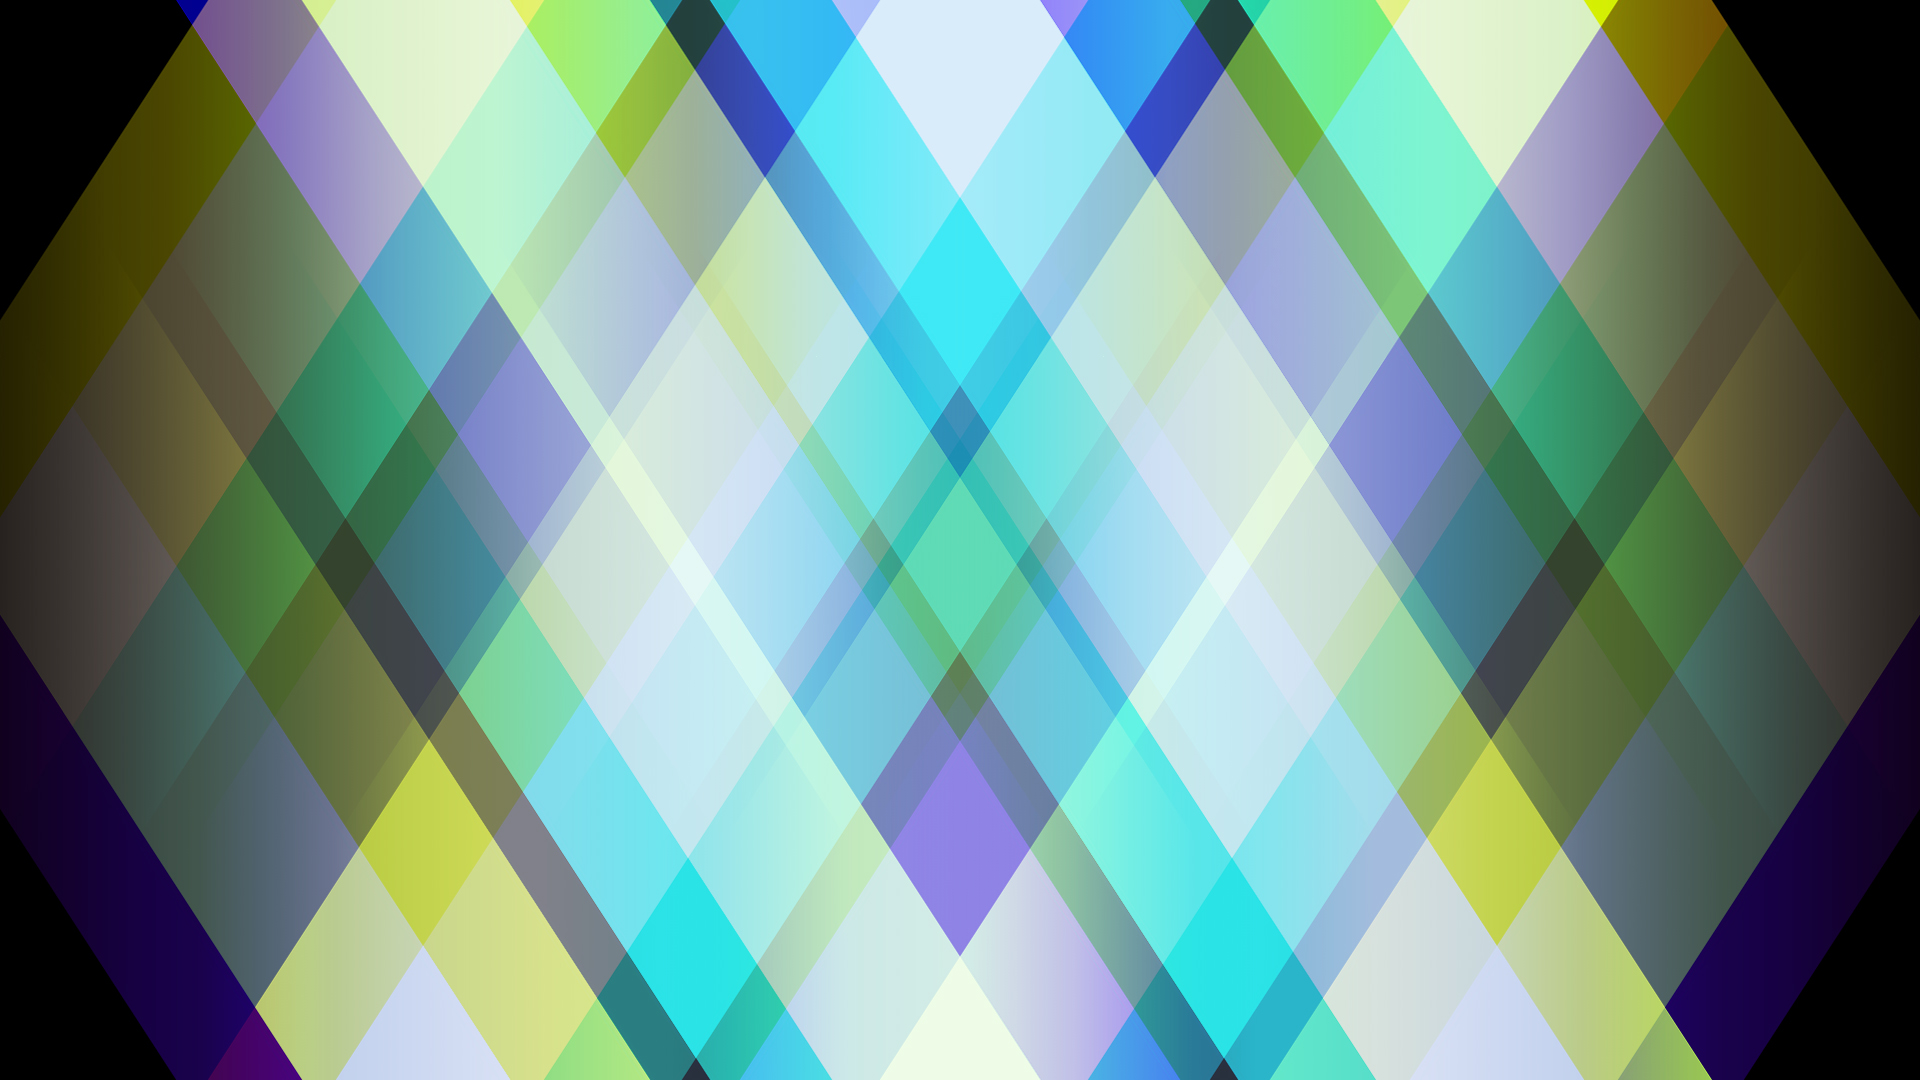 Abstract Artistic Colors Digital Art Geometry Gradient Plaid Shapes 1920x1080